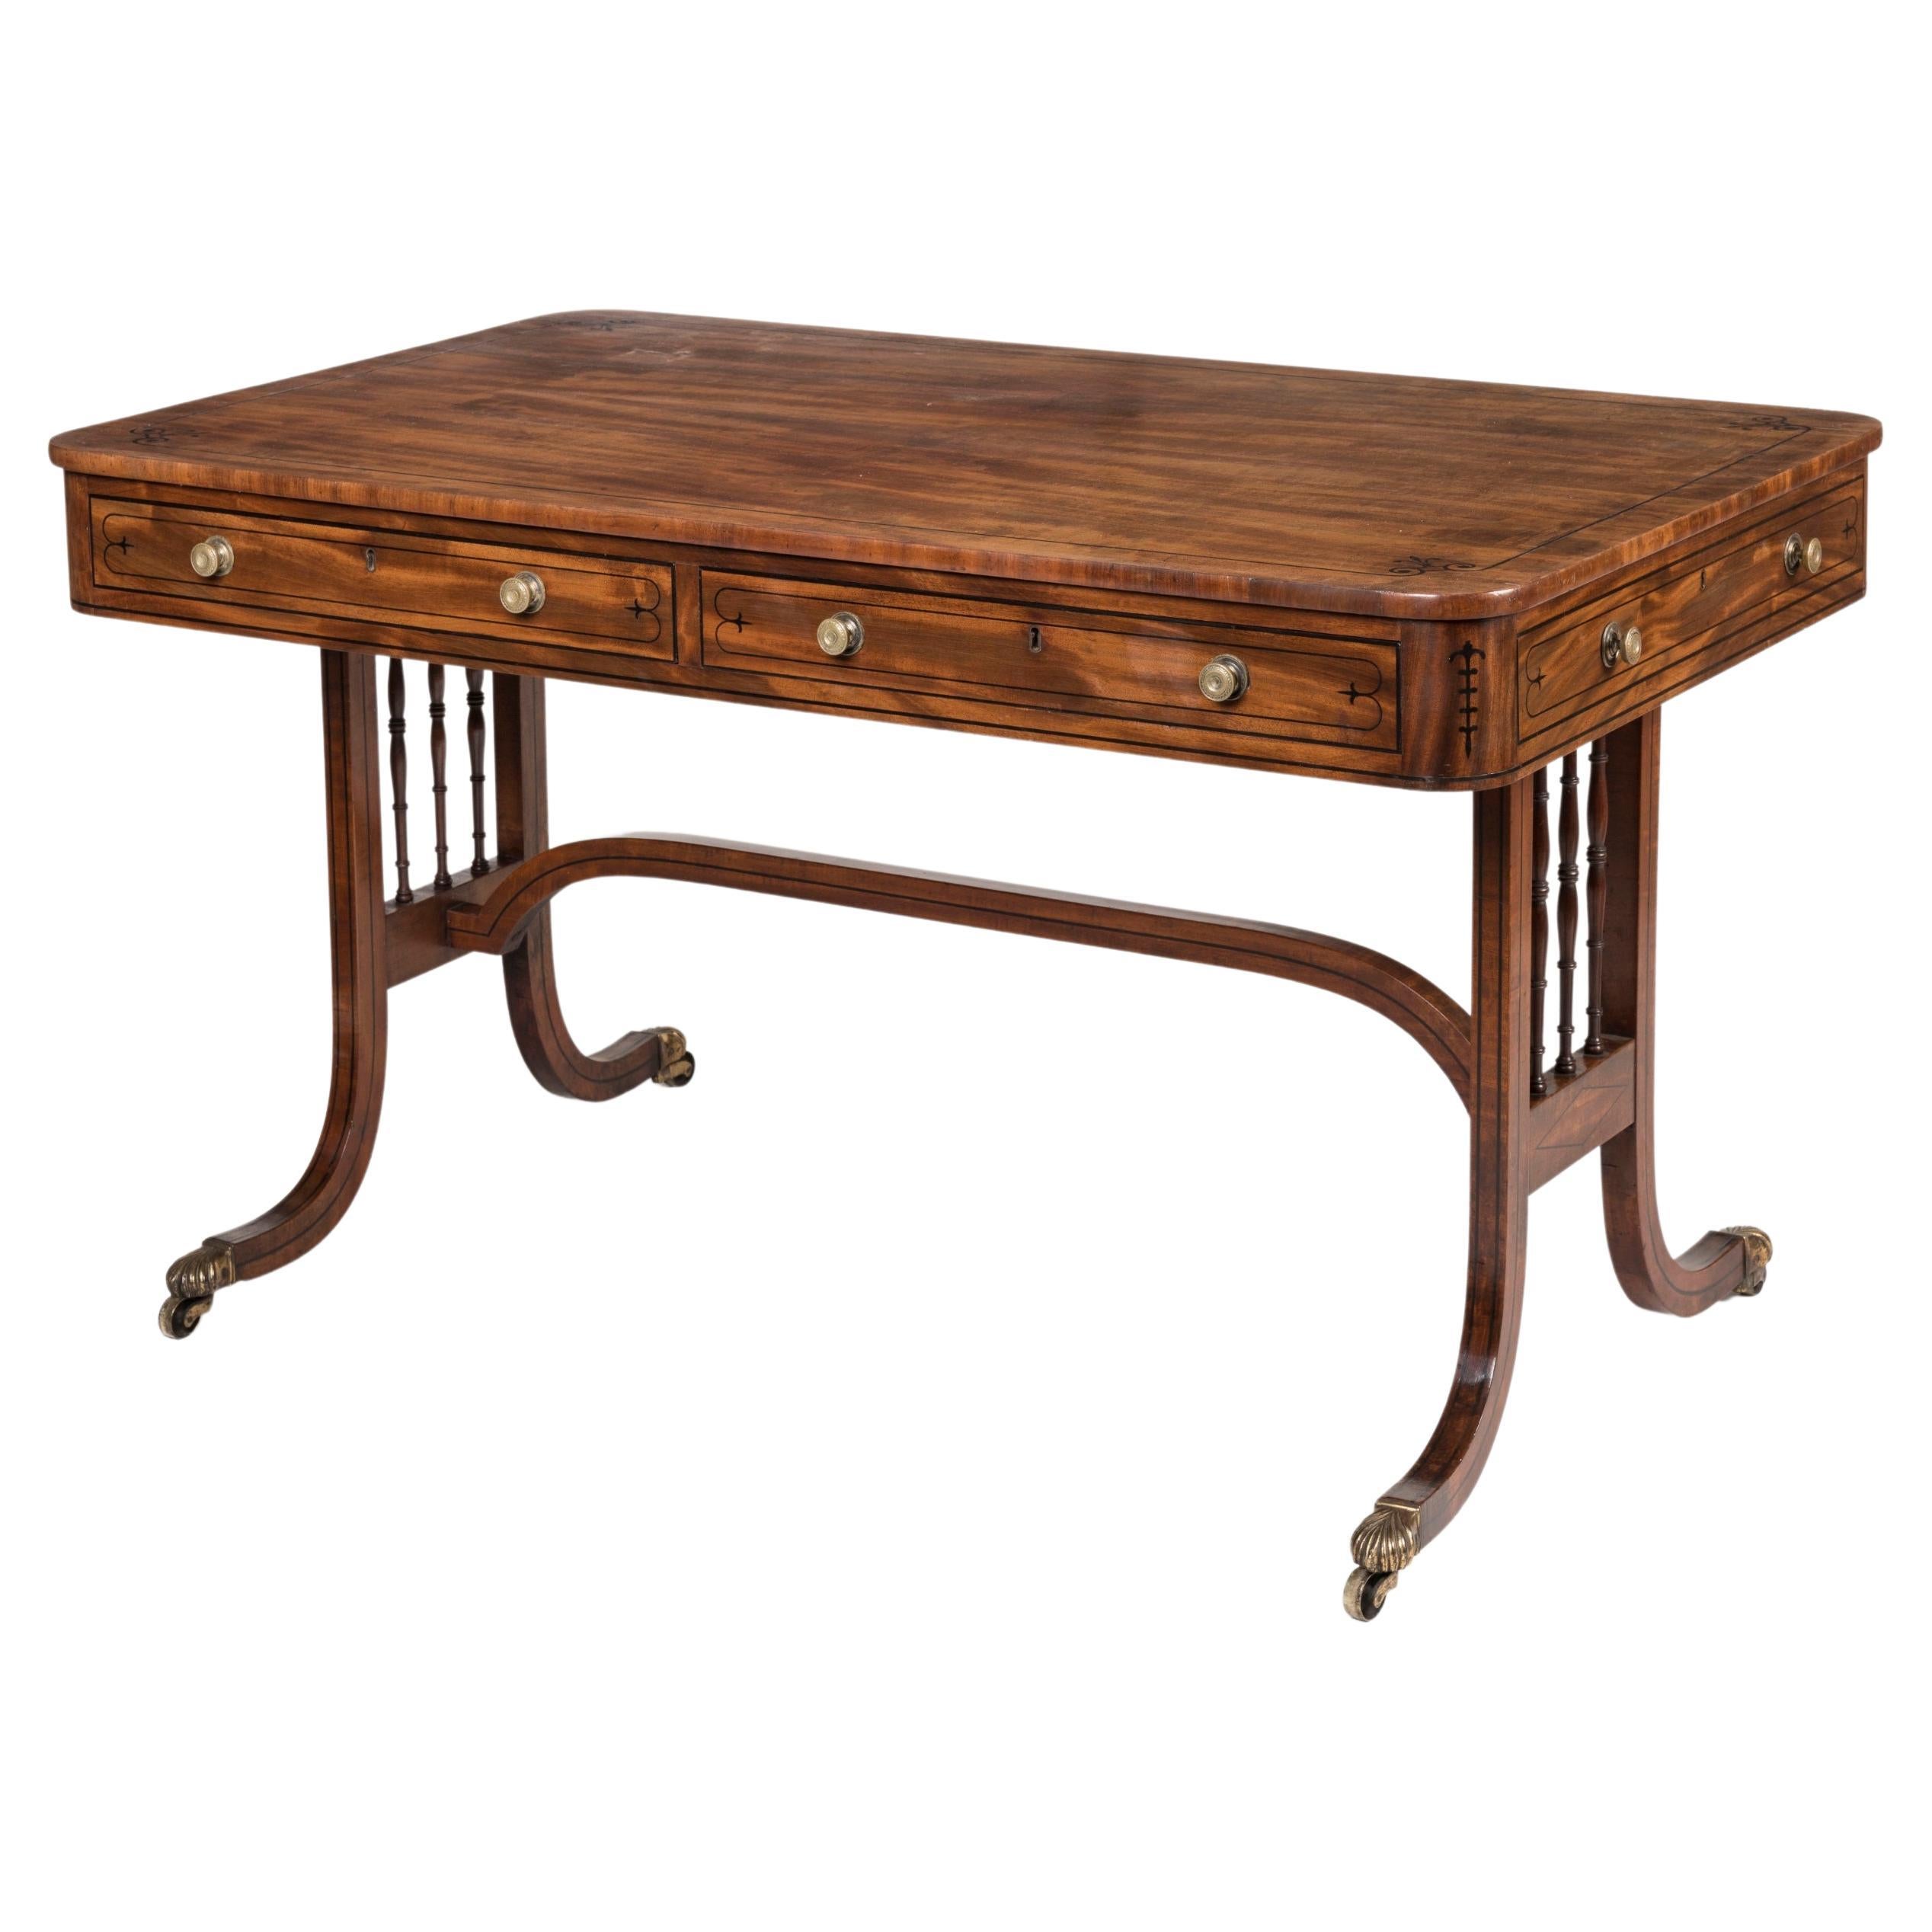 Elegant English Regency Period Mahogany Table with Inlaid Details For Sale